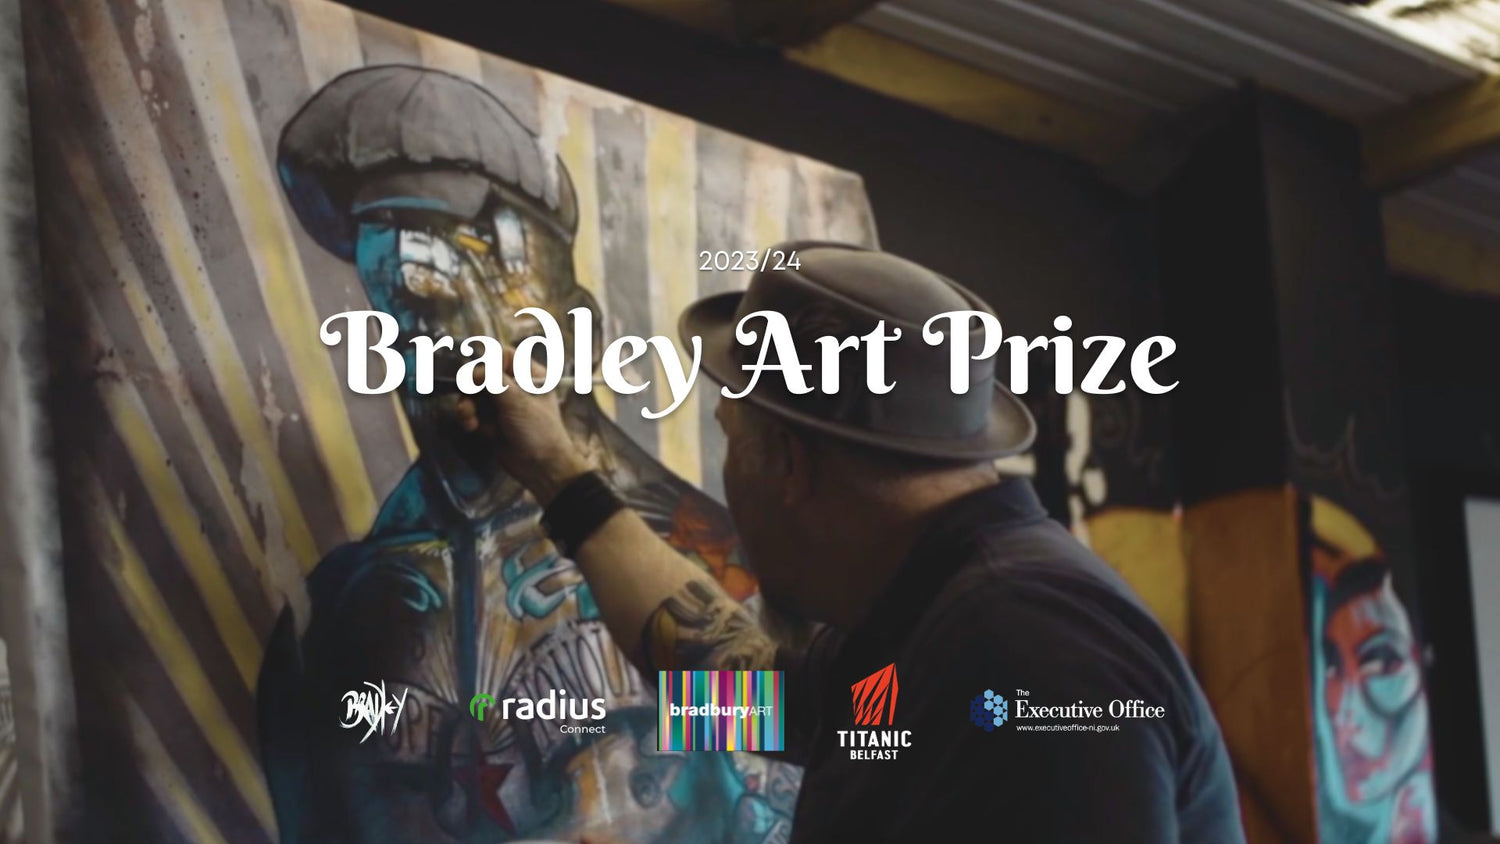 Judging Underway for the Bradley Art Prize: Celebrating Artistic Excellence